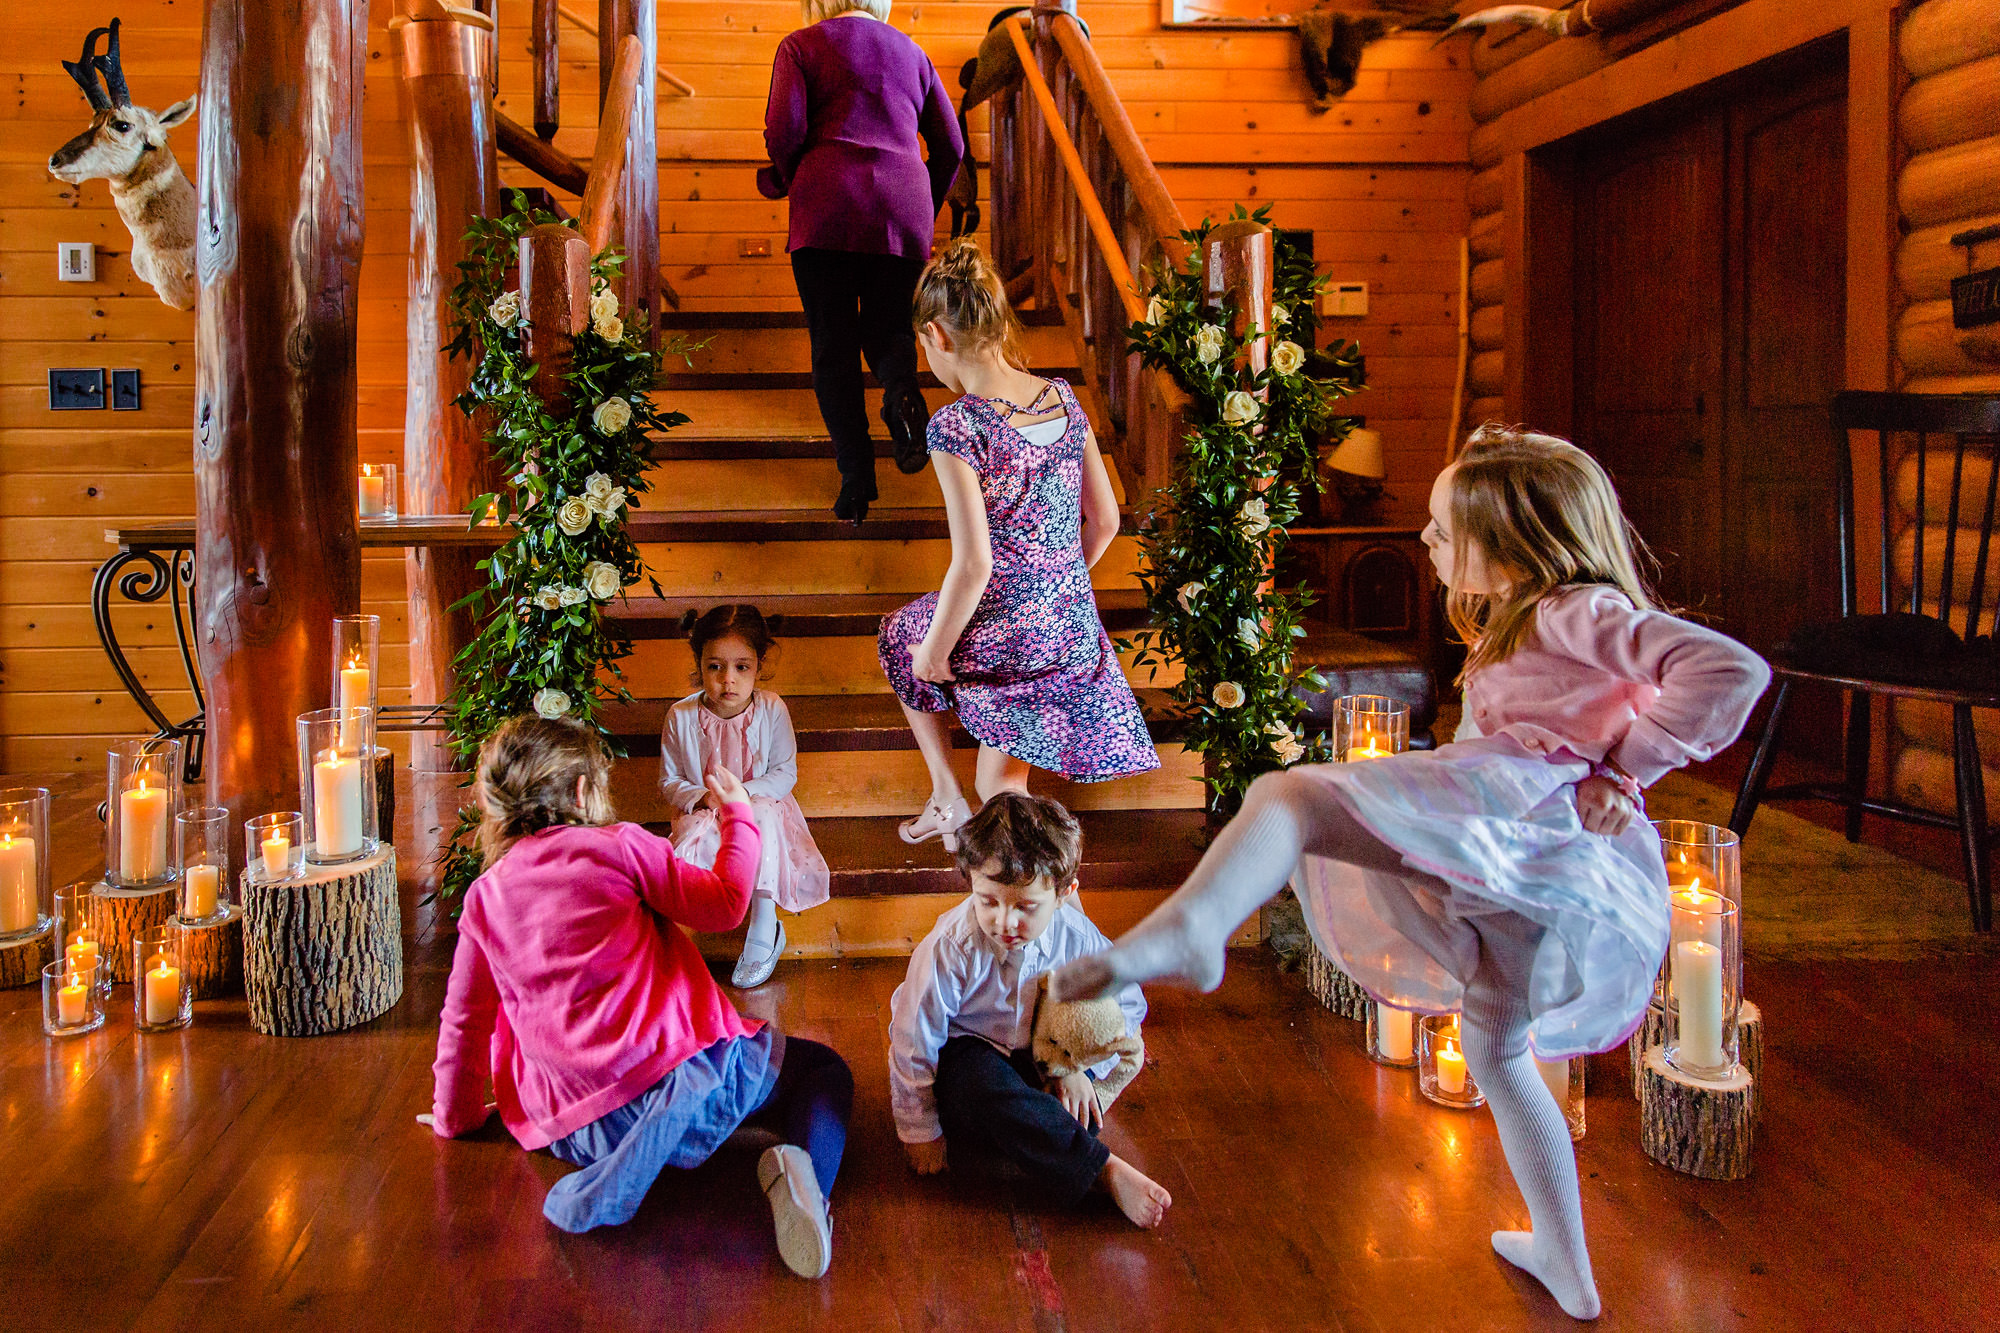 Kids gather during a wedding at Moose Lake Ranch in Maine